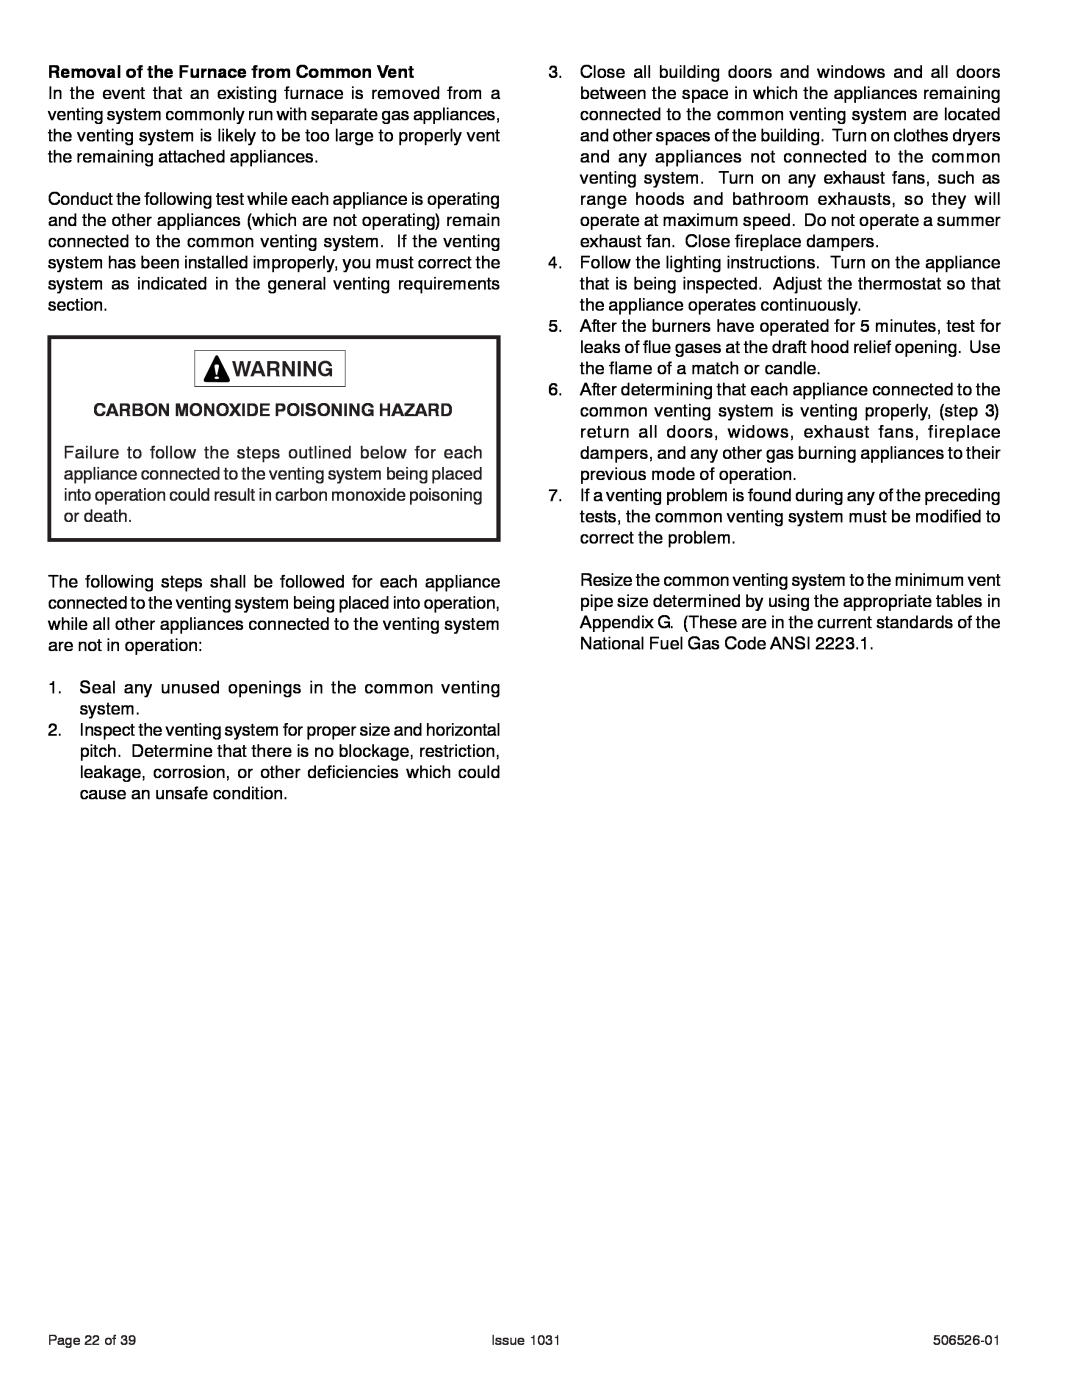 Allied Air Enterprises A80UH Removal of the Furnace from Common Vent, Carbon Monoxide Poisoning Hazard, Page 22 of, Issue 